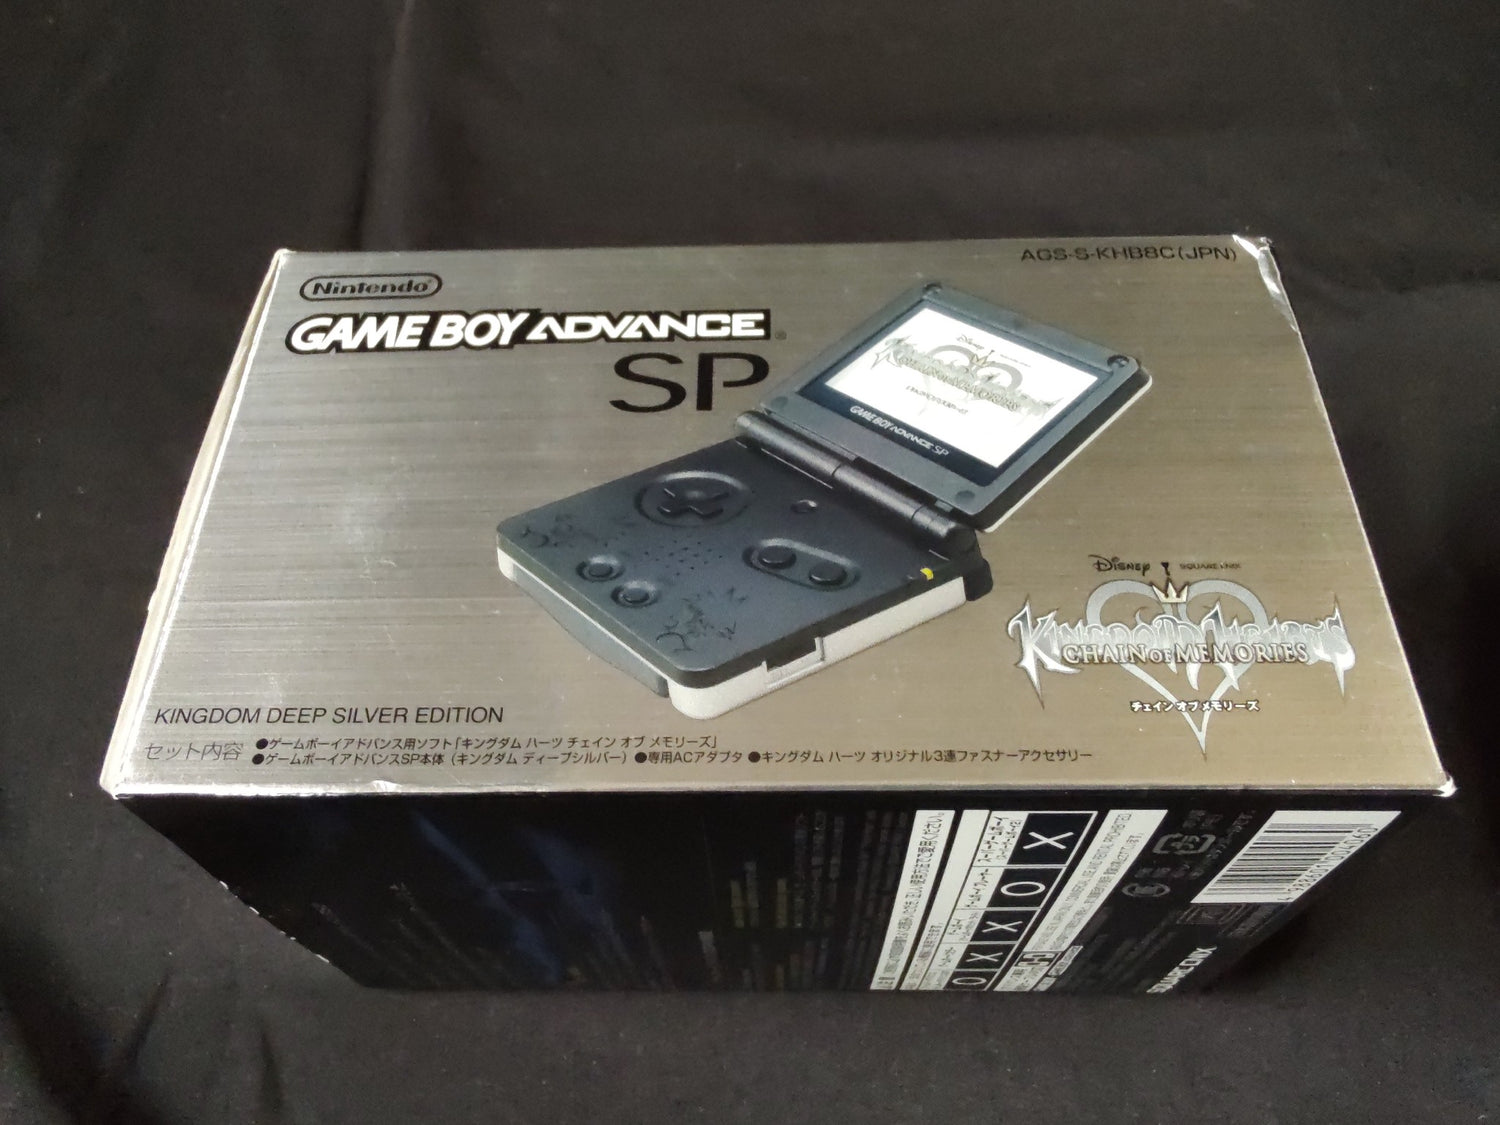 KINGDOM HEARTS LIMITED GAMEBOY ADVANCE SP CONSOLE set Boxed